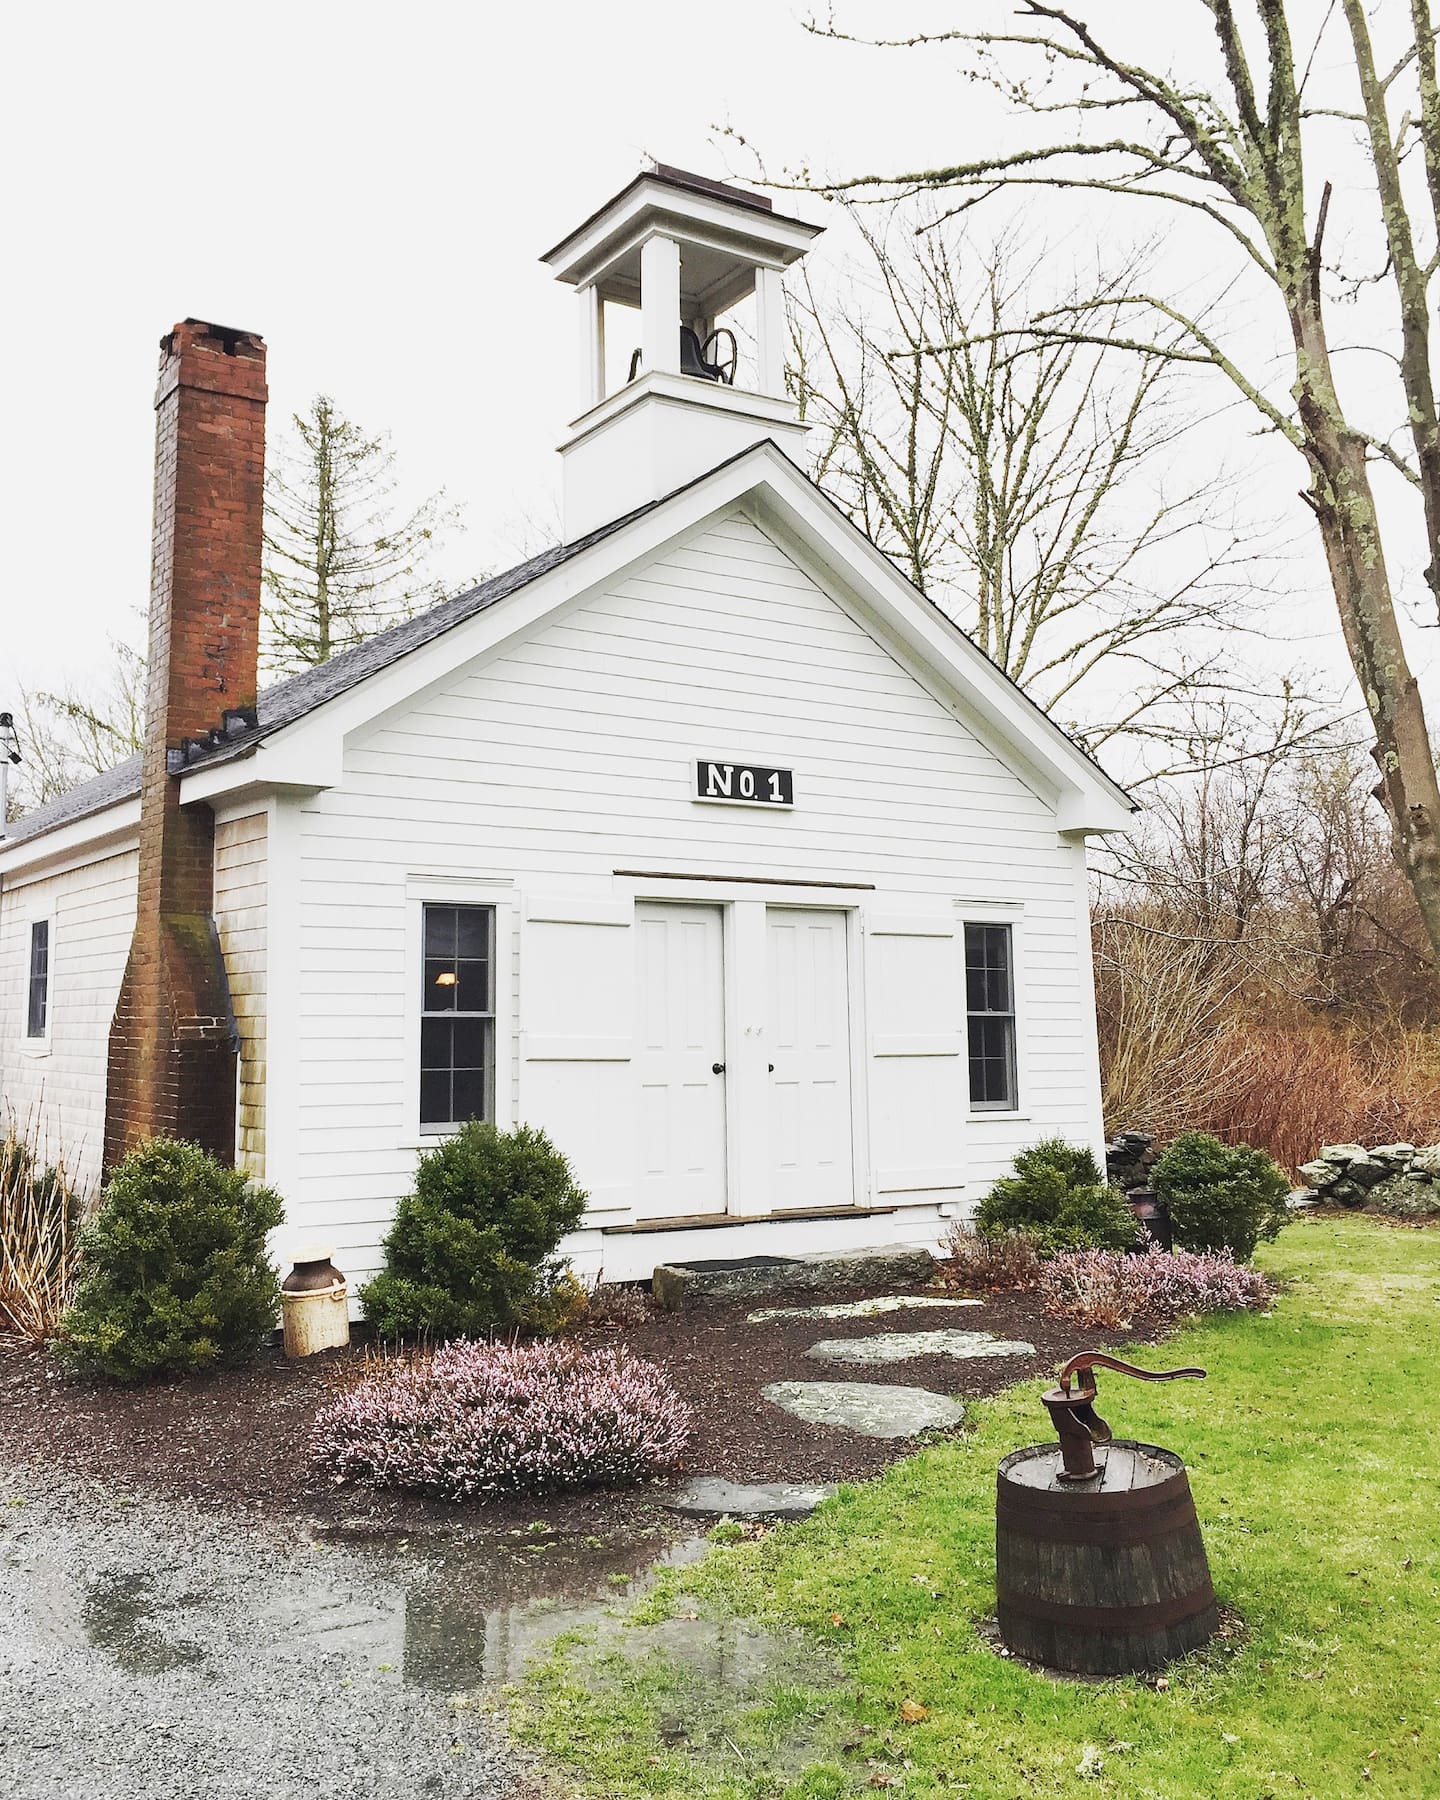 Stay in an old schoolhouse at one of the best Airbnbs in the United States